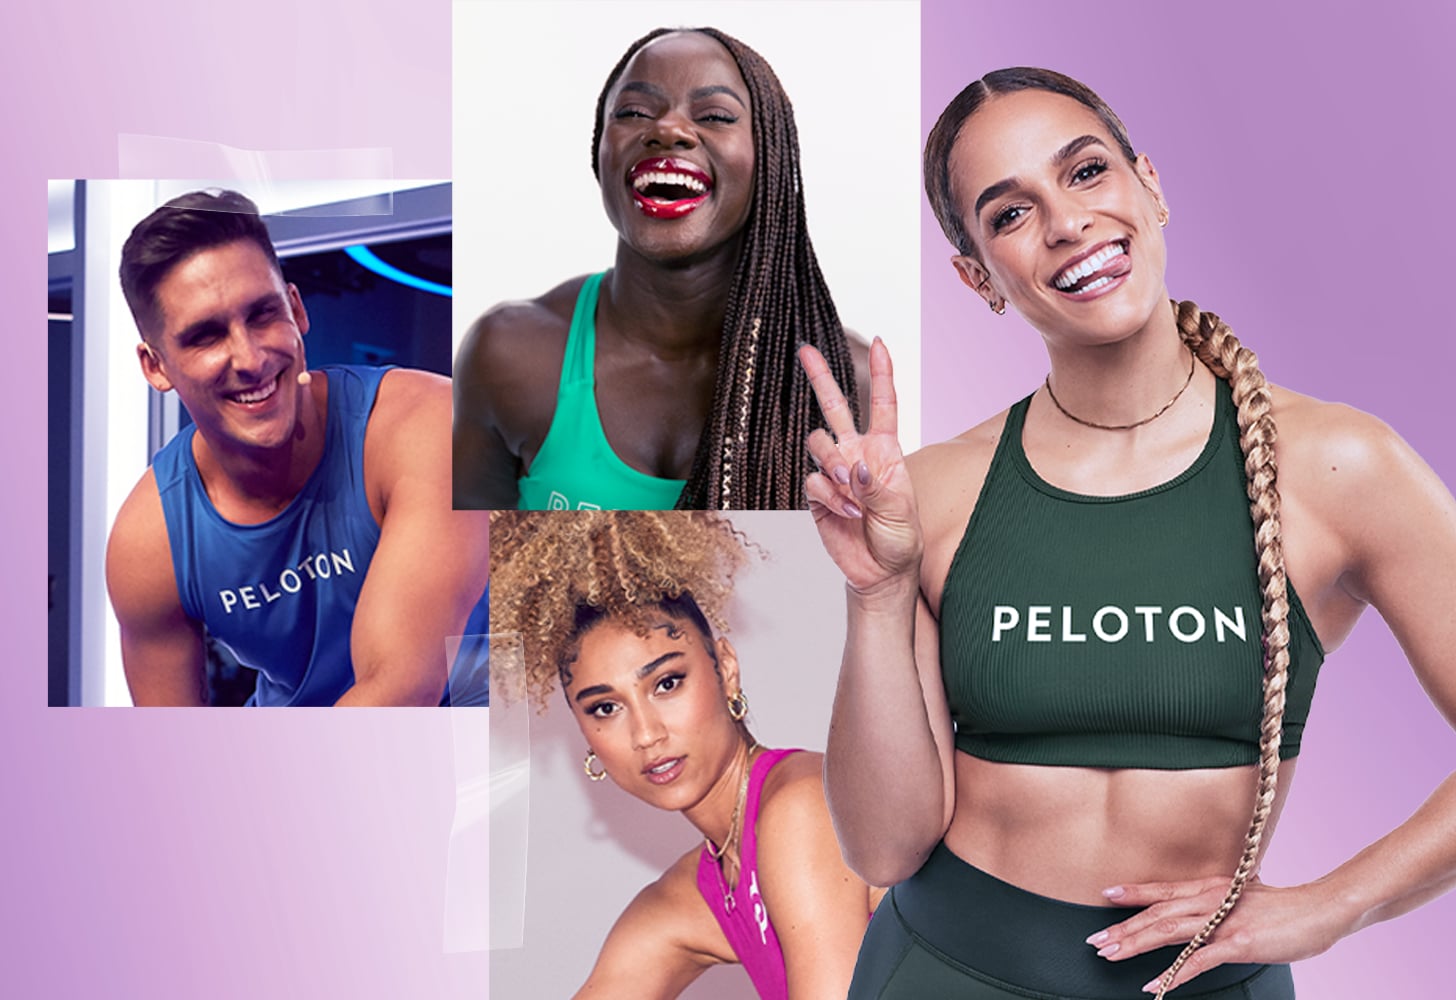 5 Fitness Instructors Share Their Favorite Sports Bra